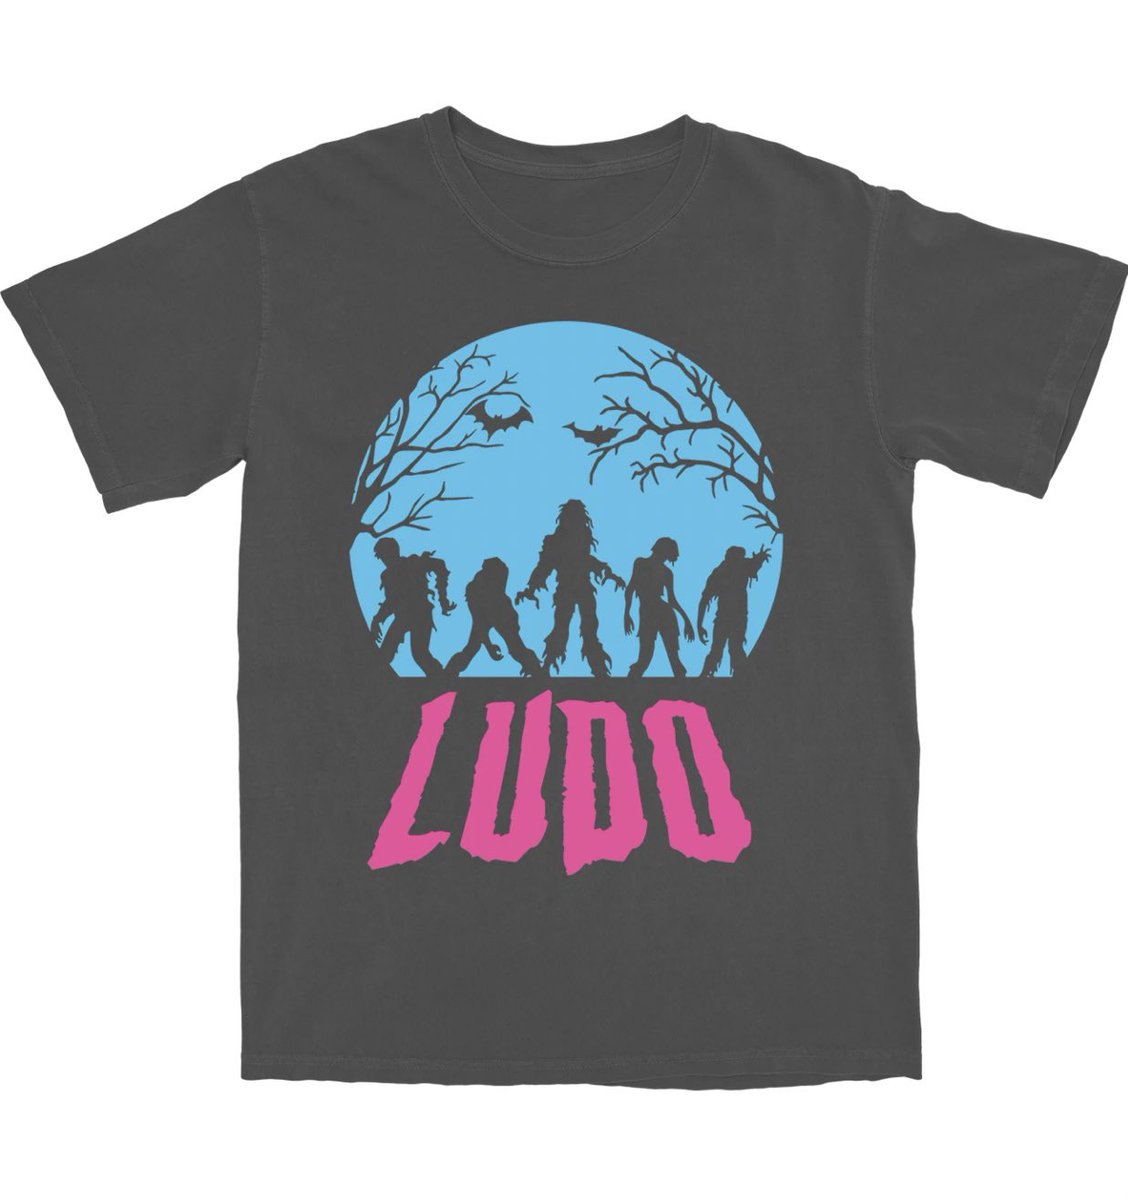 THE NEW MERCH IS UP! LudoMerch.com